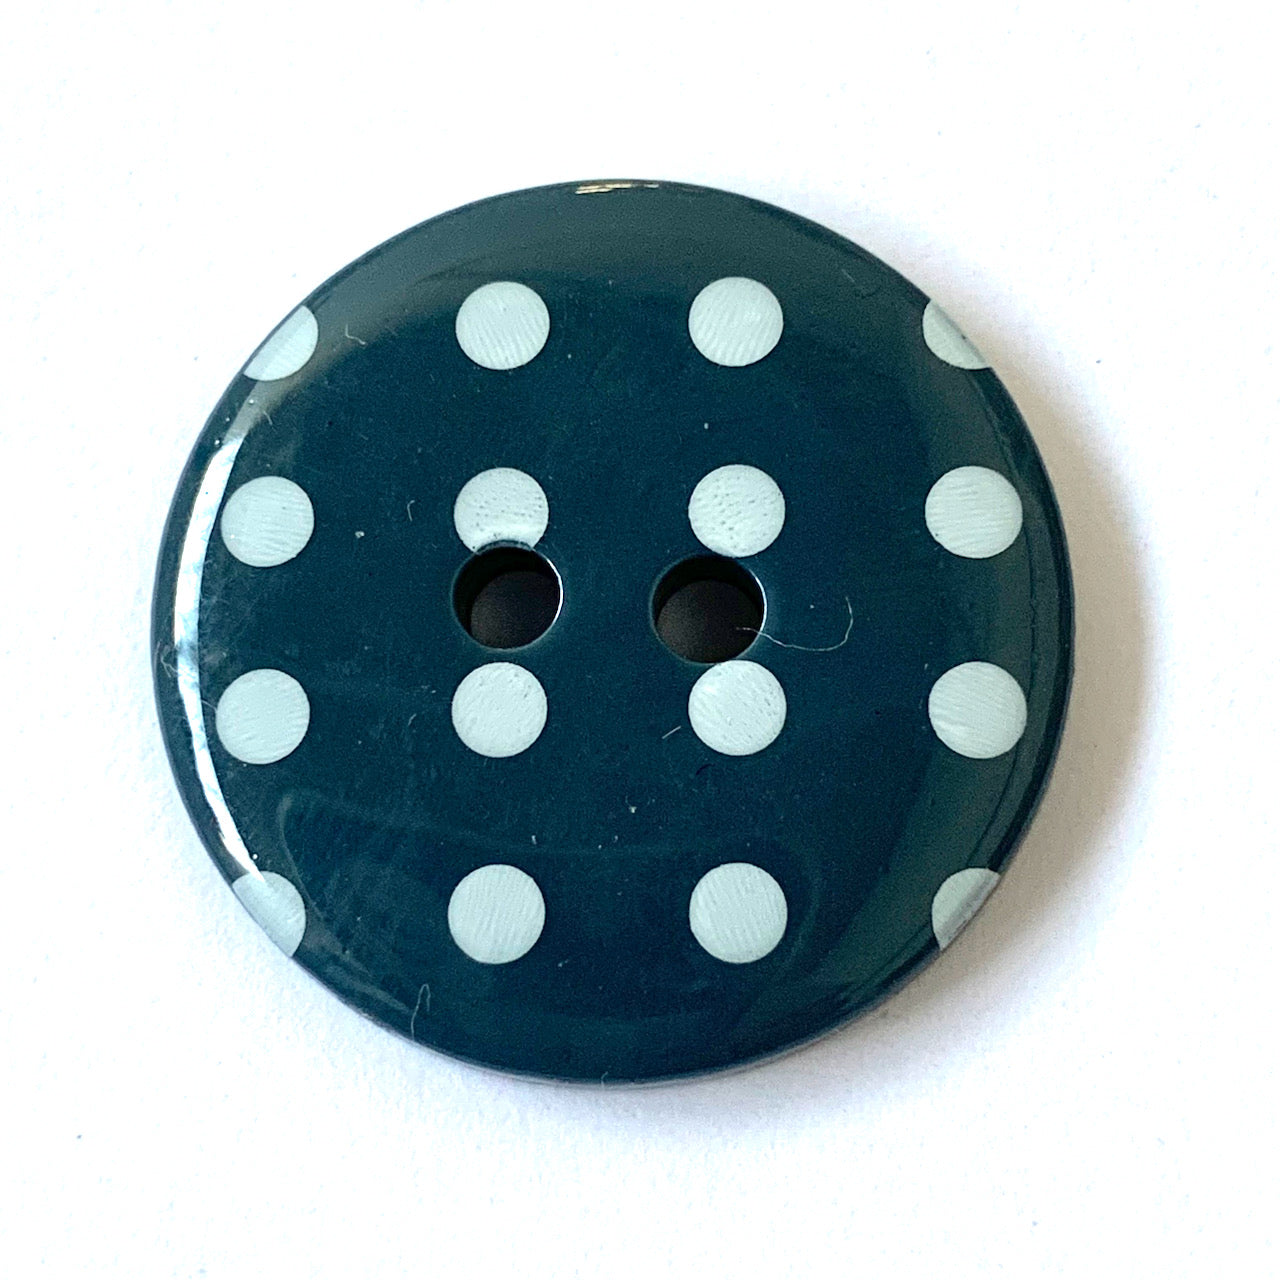 23mm  Fine Style Polka Dot Buttons